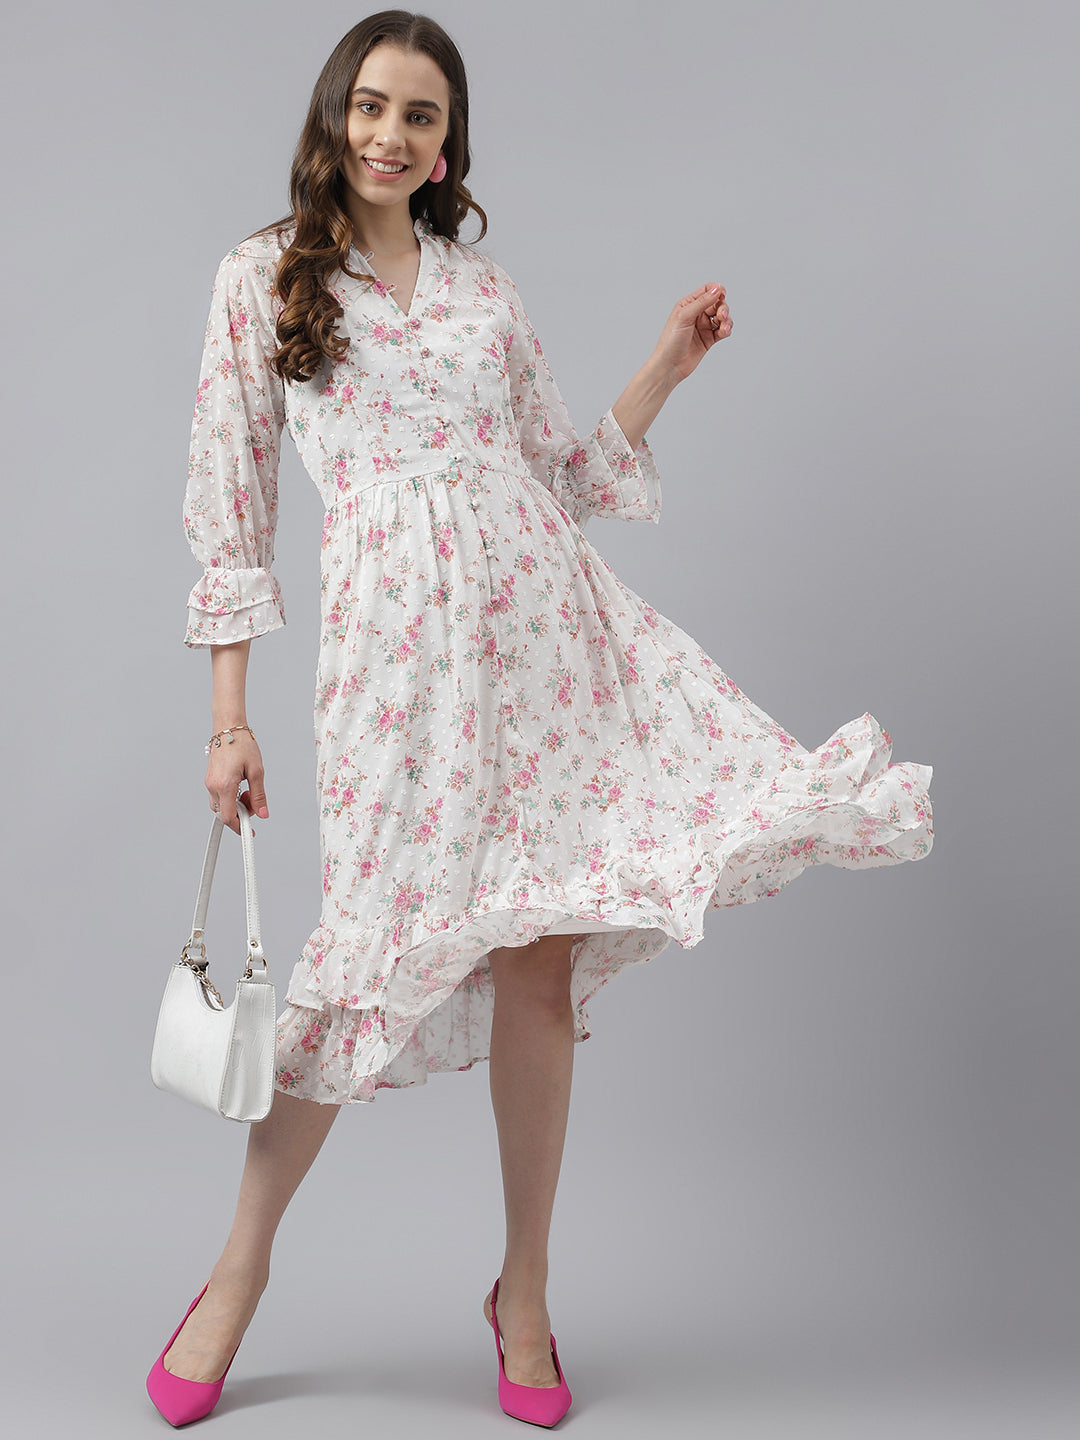 Pink Floral Printed Flute Sleeves High Waist Layered Dress With Mandarin Collar